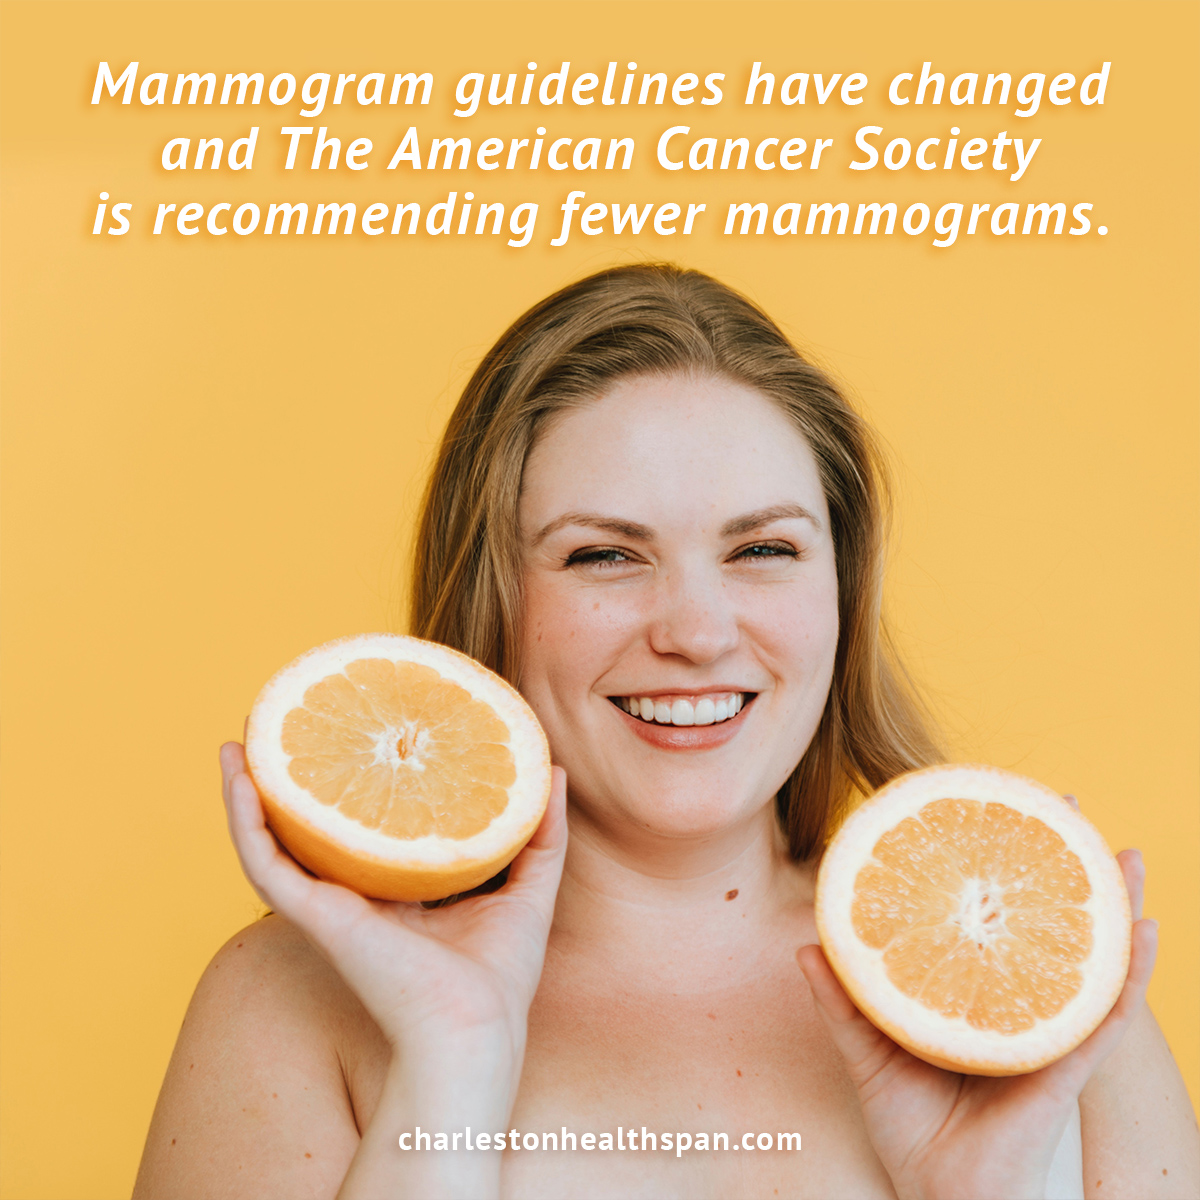 The American Cancer Society has changed mammogram guidelines